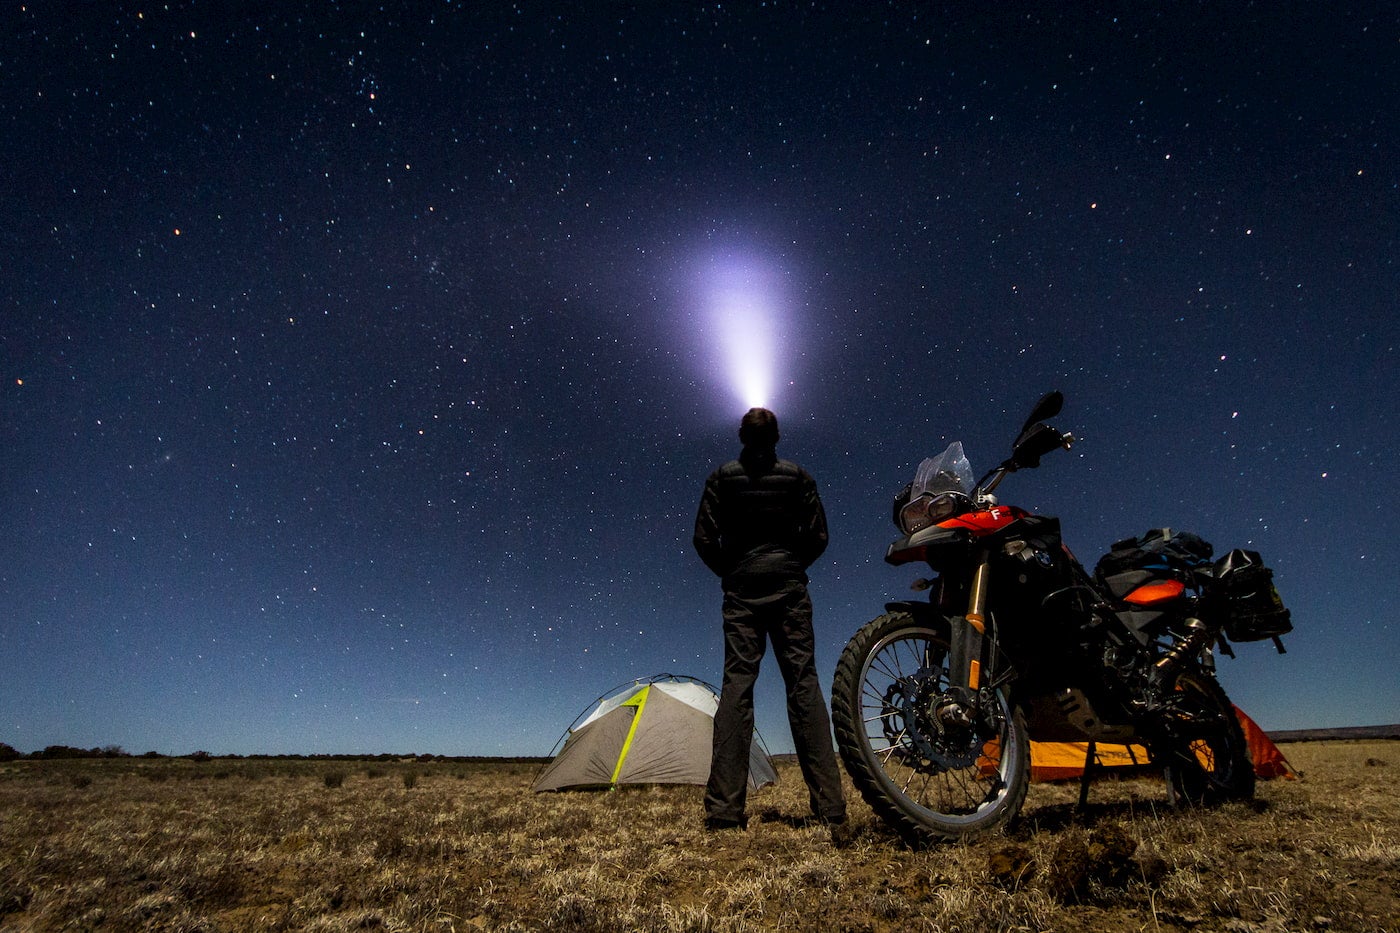 Motorcycle camper standing beside his tent in an open field.